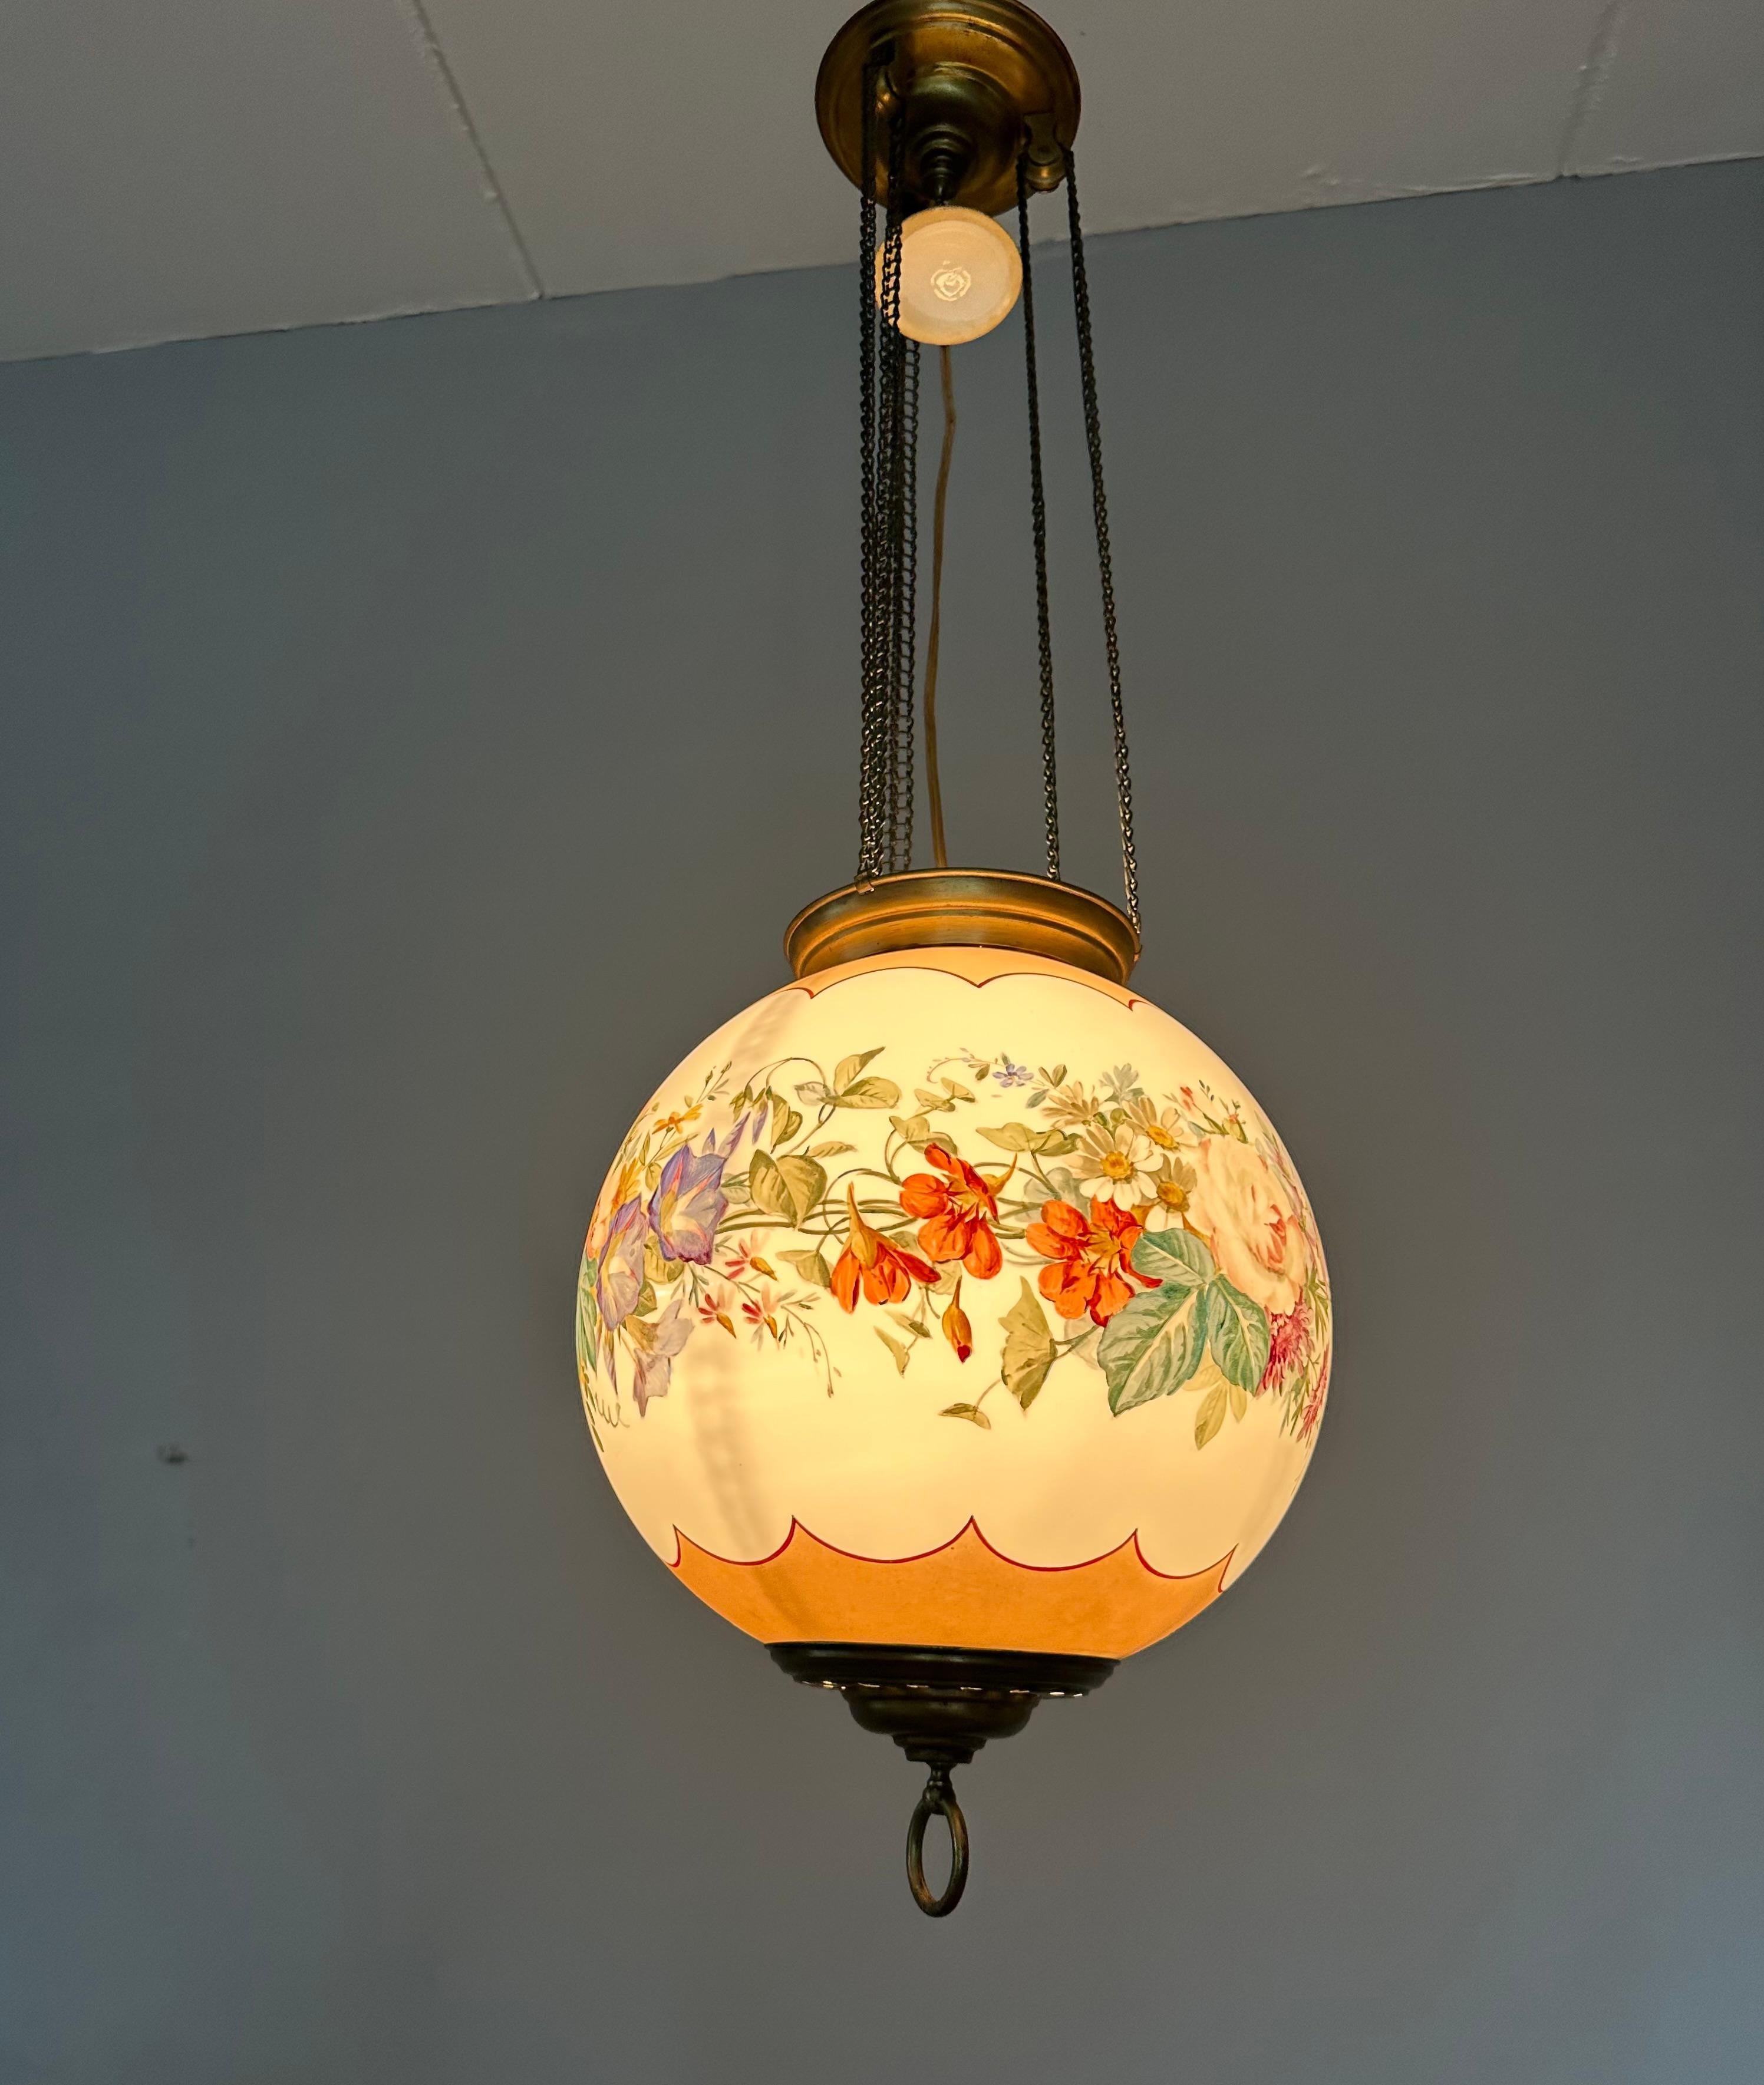 Antique Round Opaline Glass Shade Pendant Light with Wreath of Flowers Decor For Sale 10